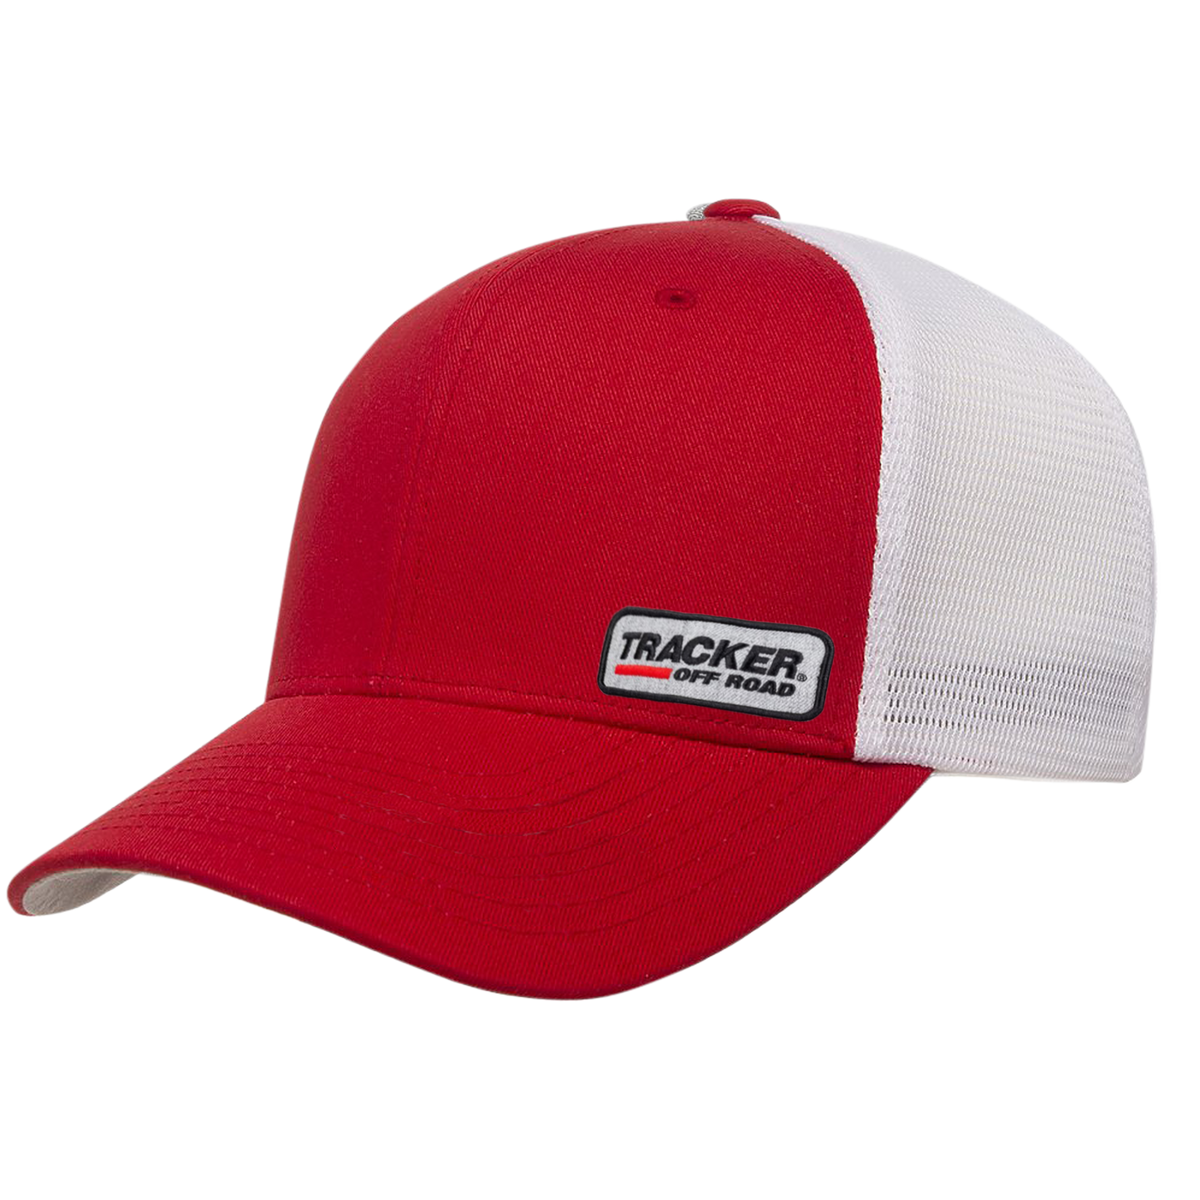 Red White Cap Transparent Free PNG